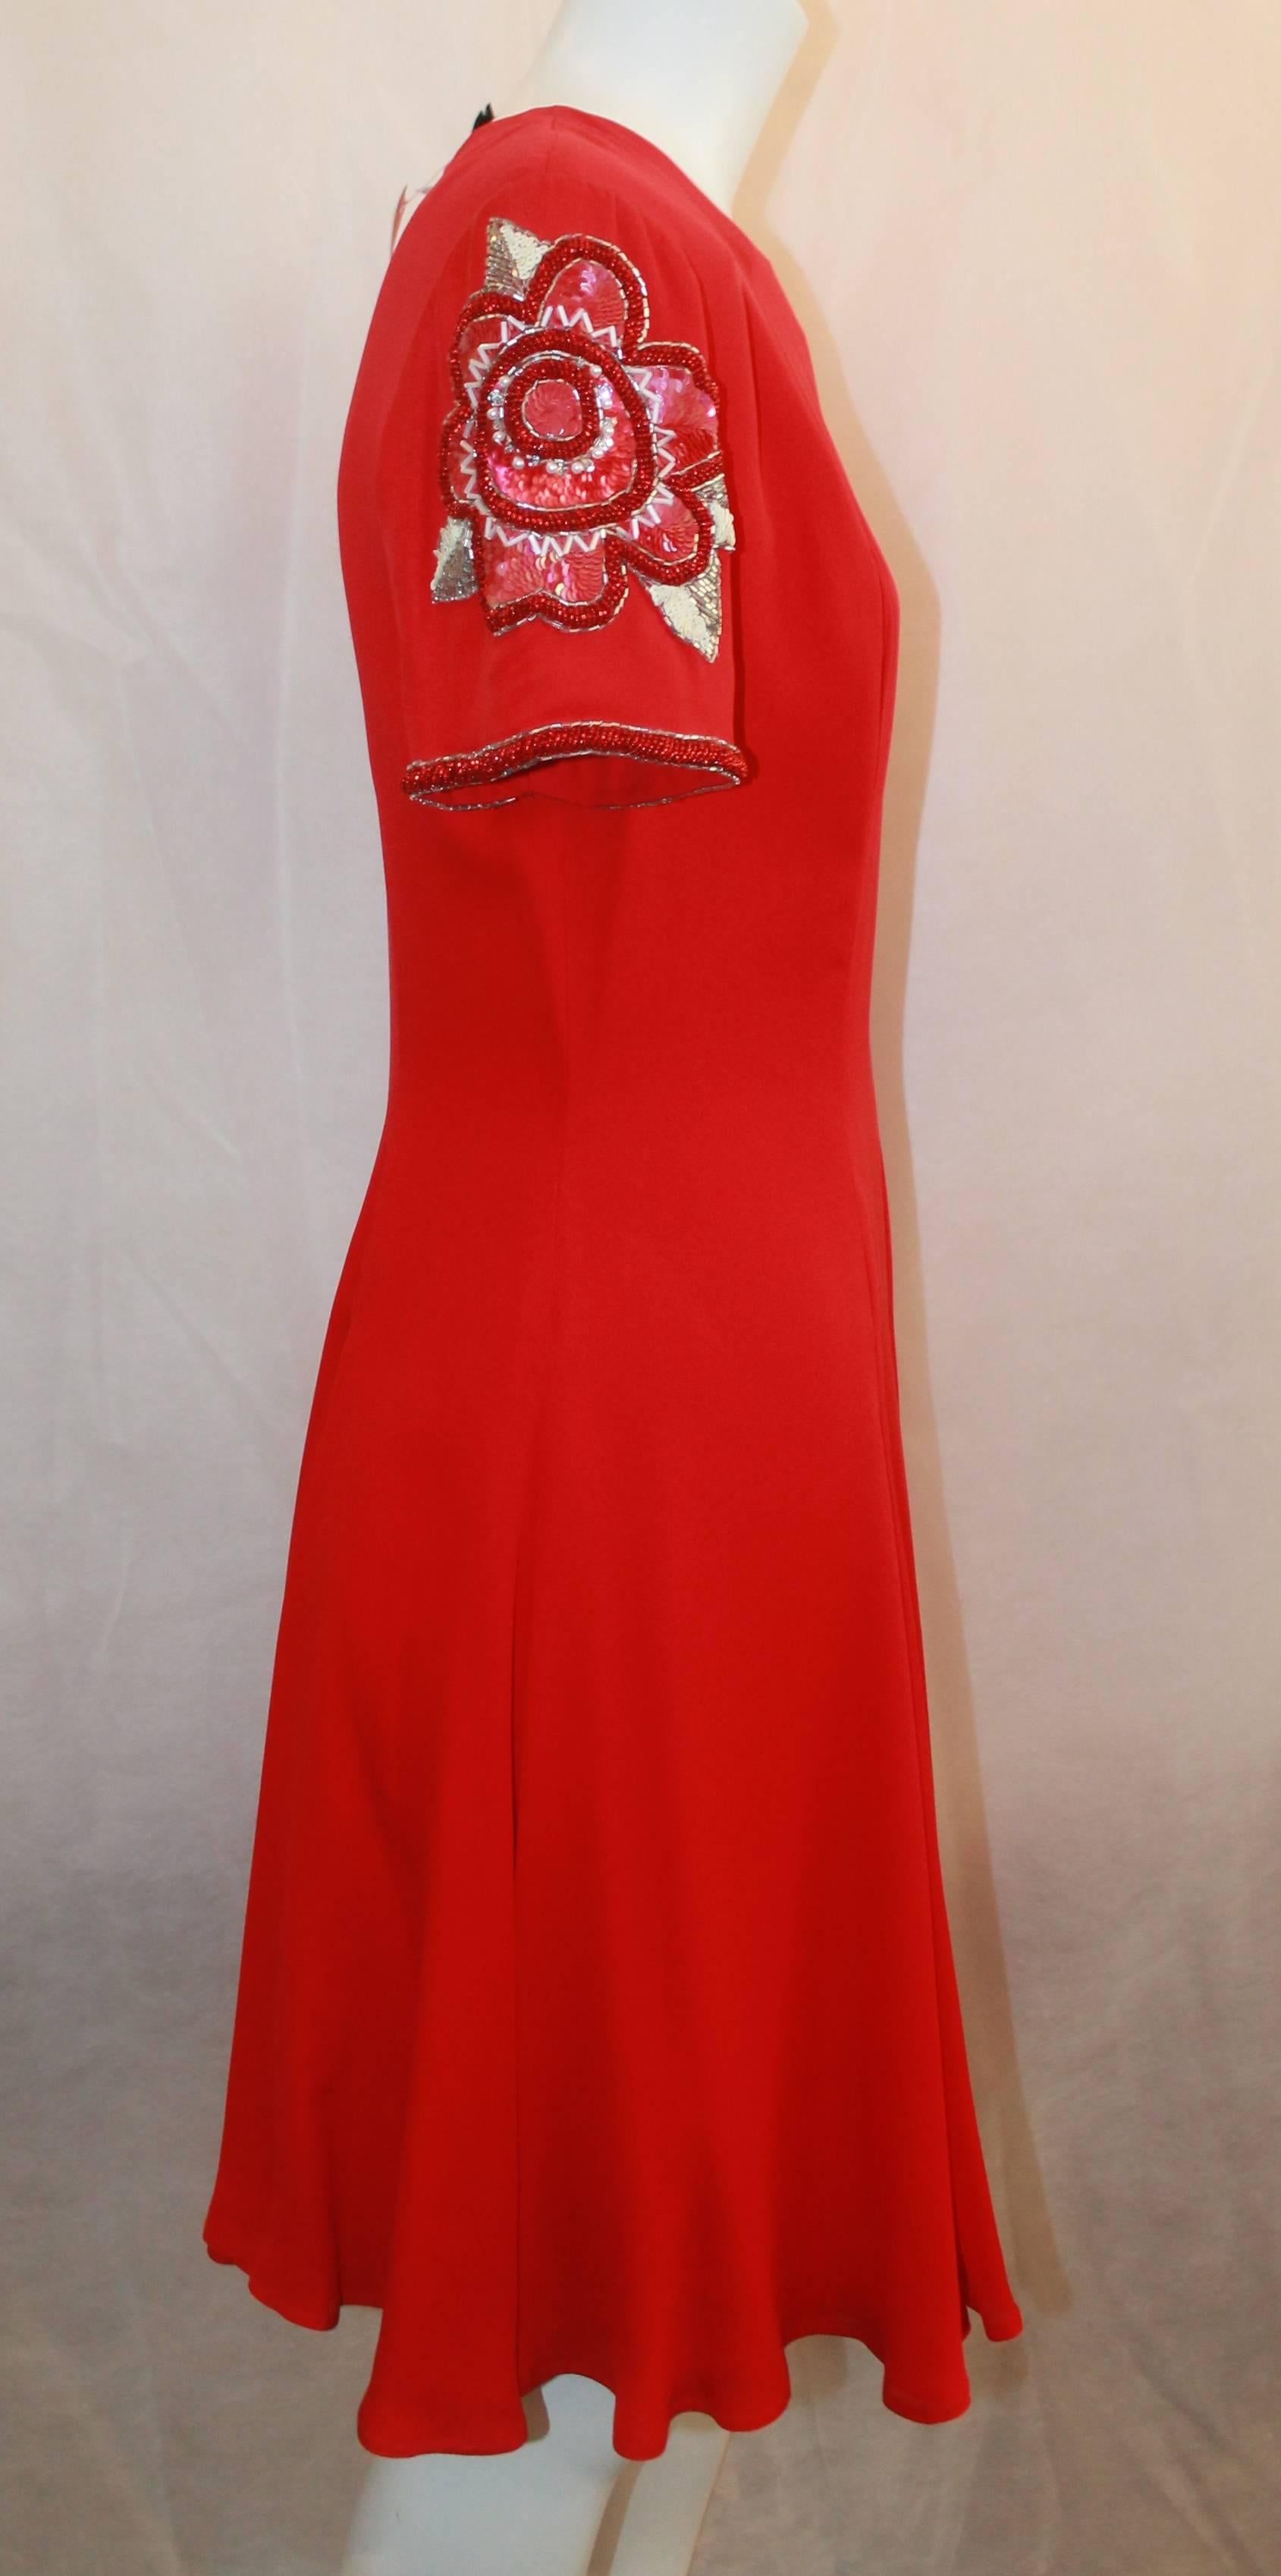 Women's Bob Mackie Red Silk Short Sleeve Dress with Floral Beading - 6